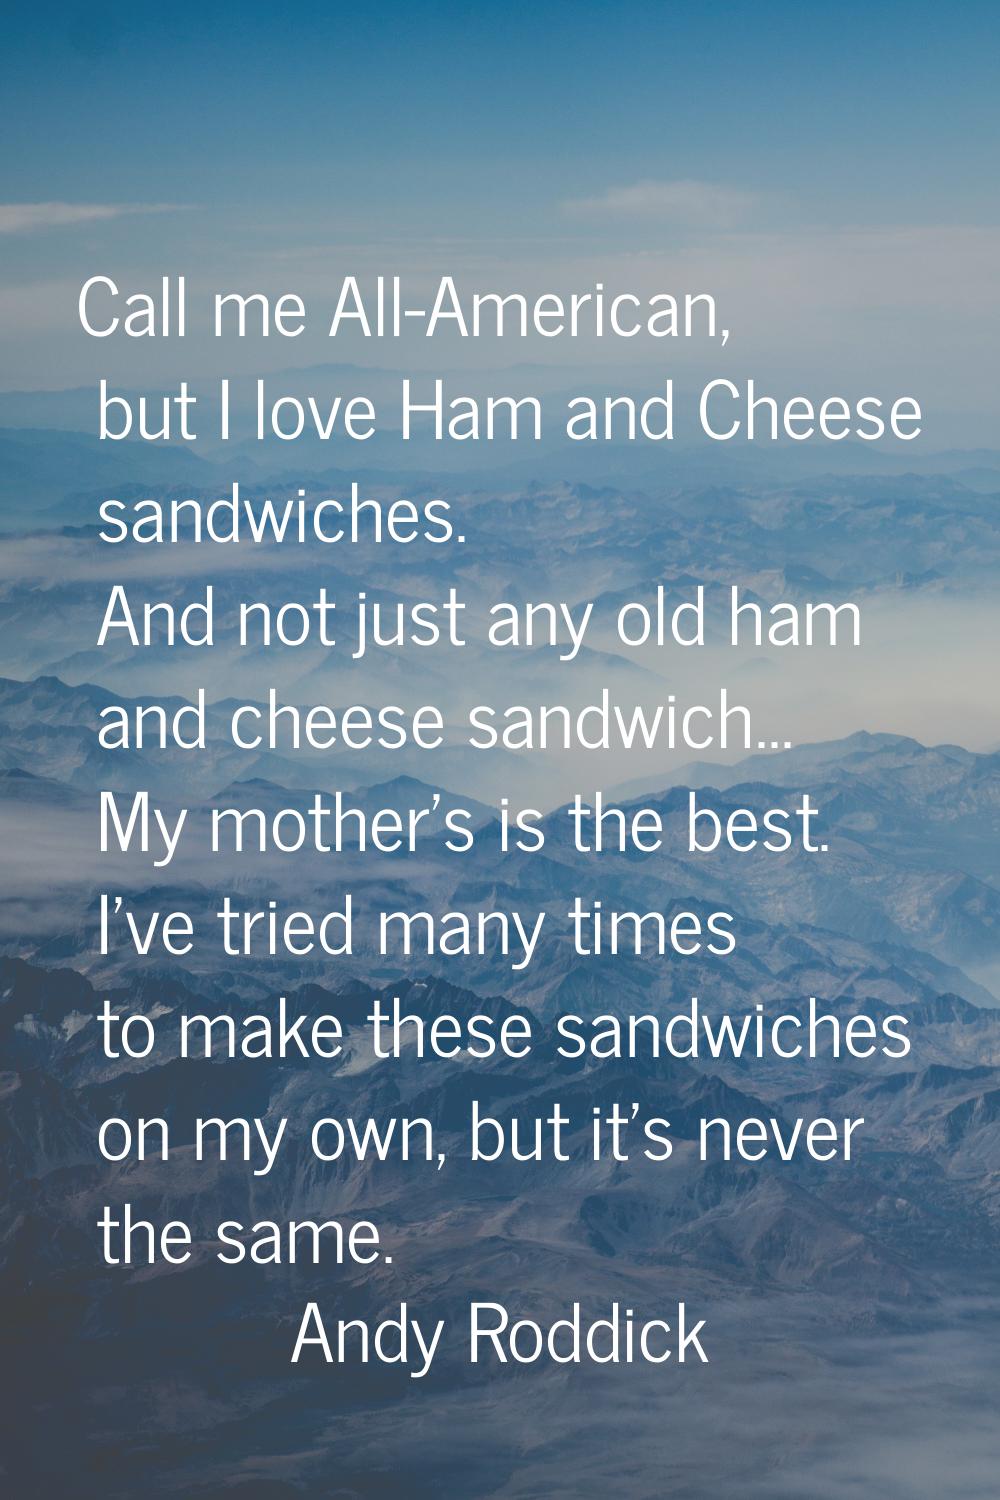 Call me All-American, but I love Ham and Cheese sandwiches. And not just any old ham and cheese san